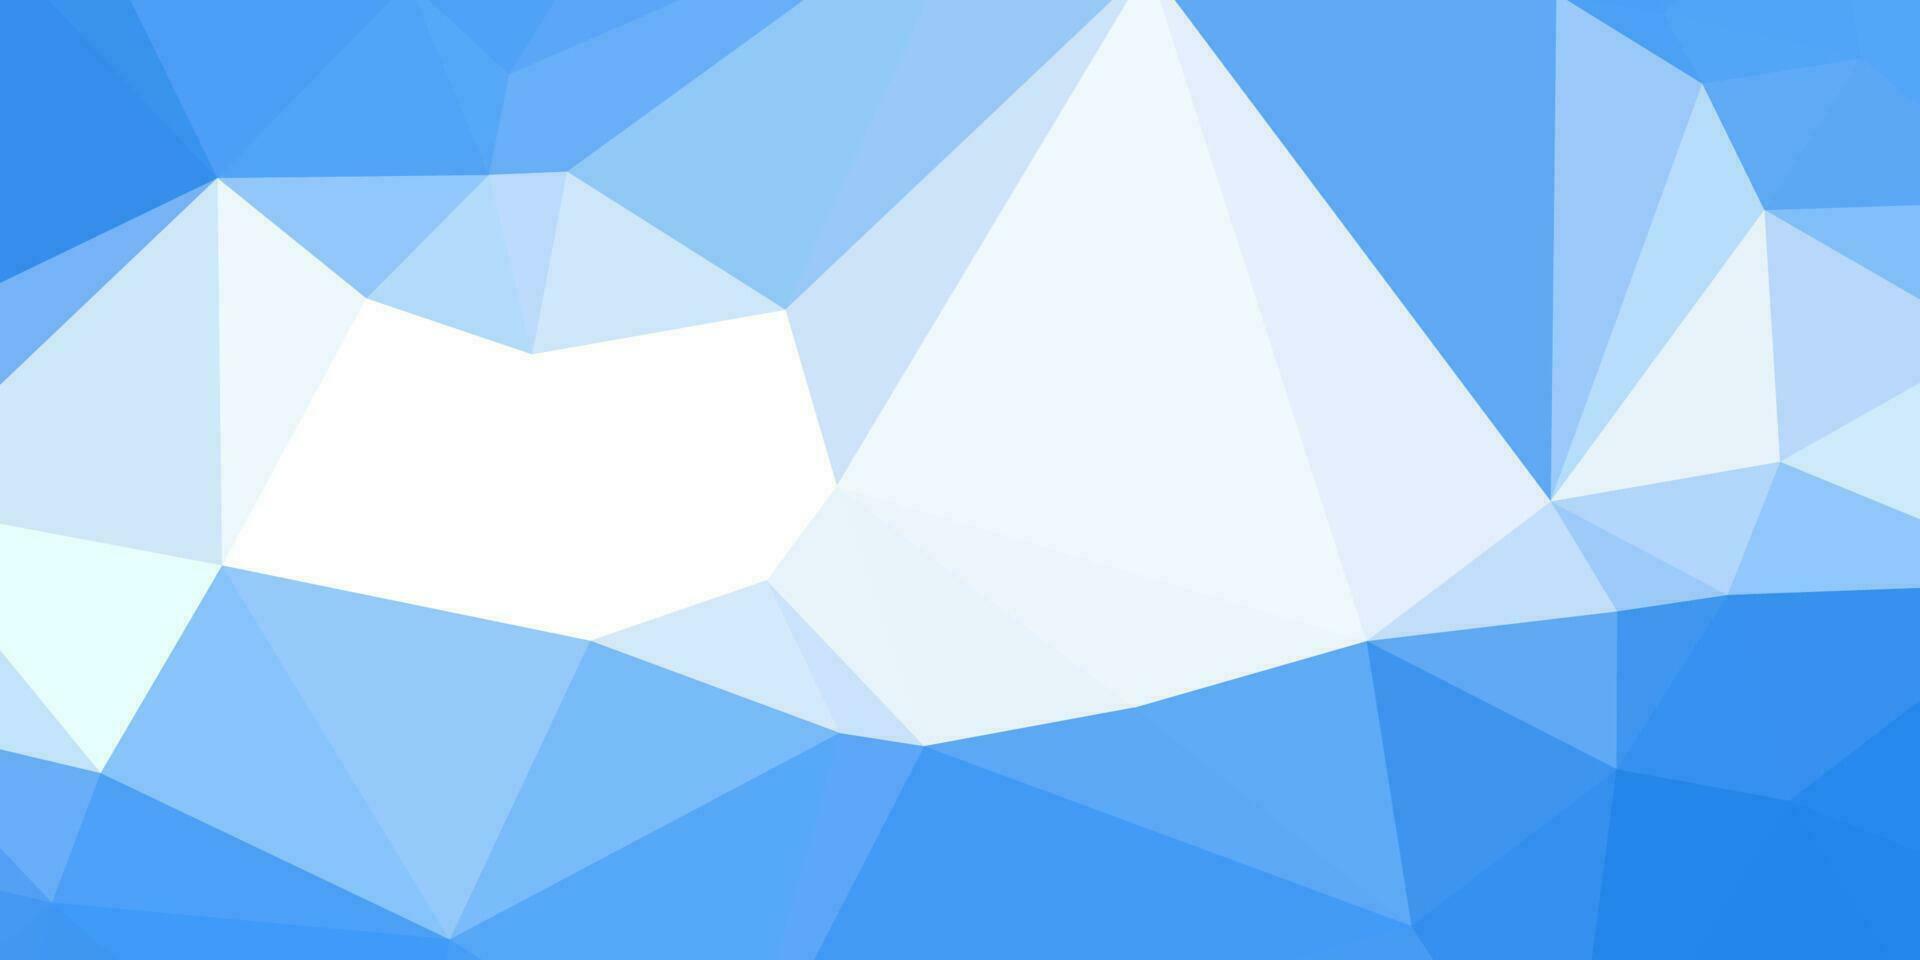 abstract blue and white geometric background with triangles vector